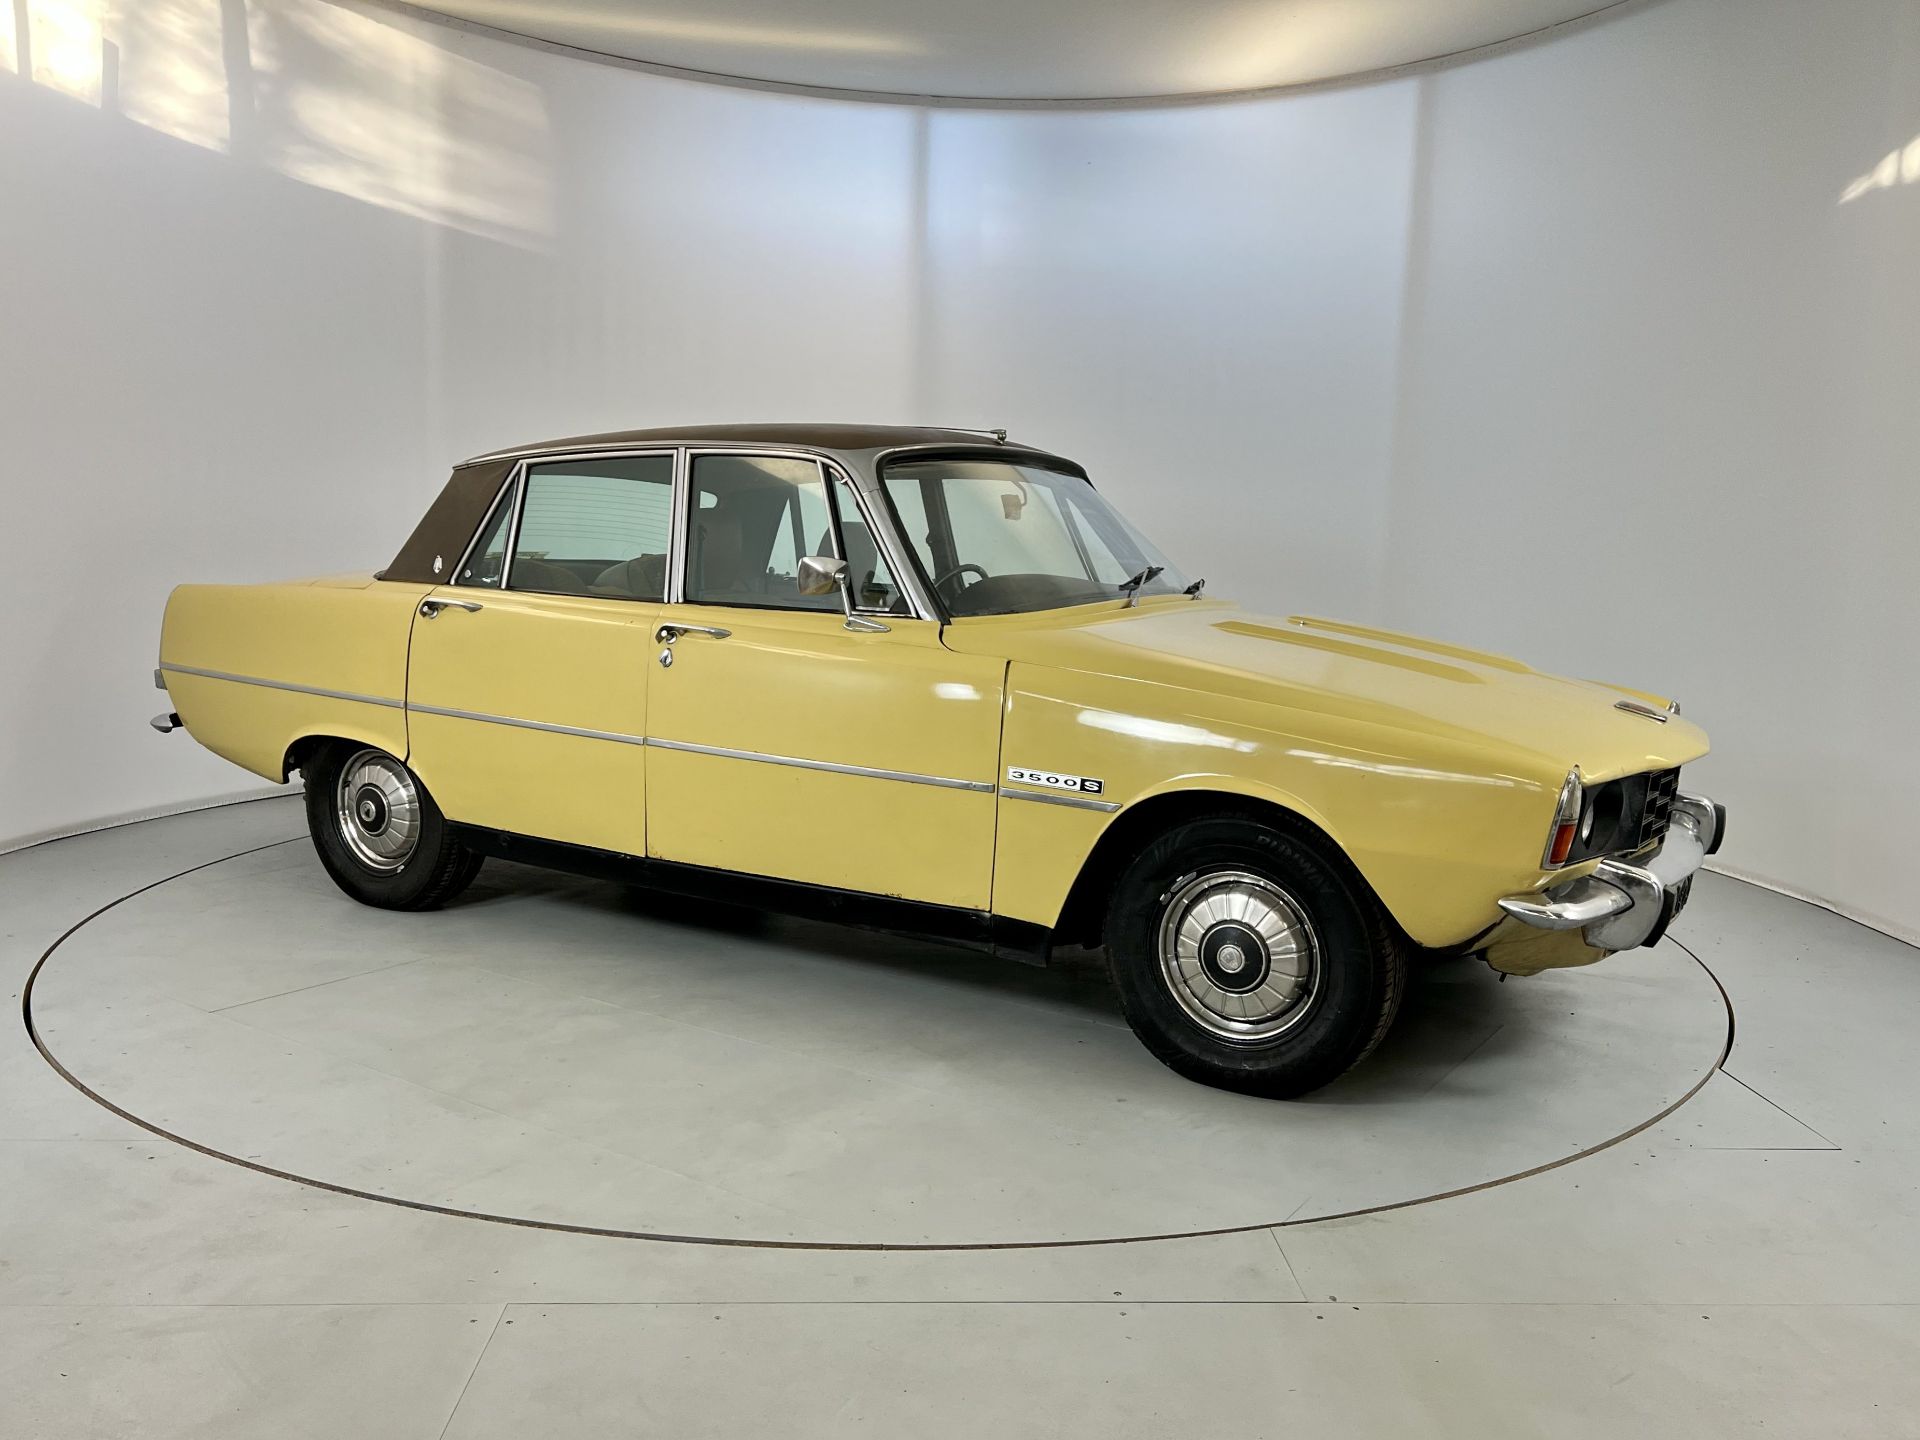 Rover 3500 S - Image 12 of 30